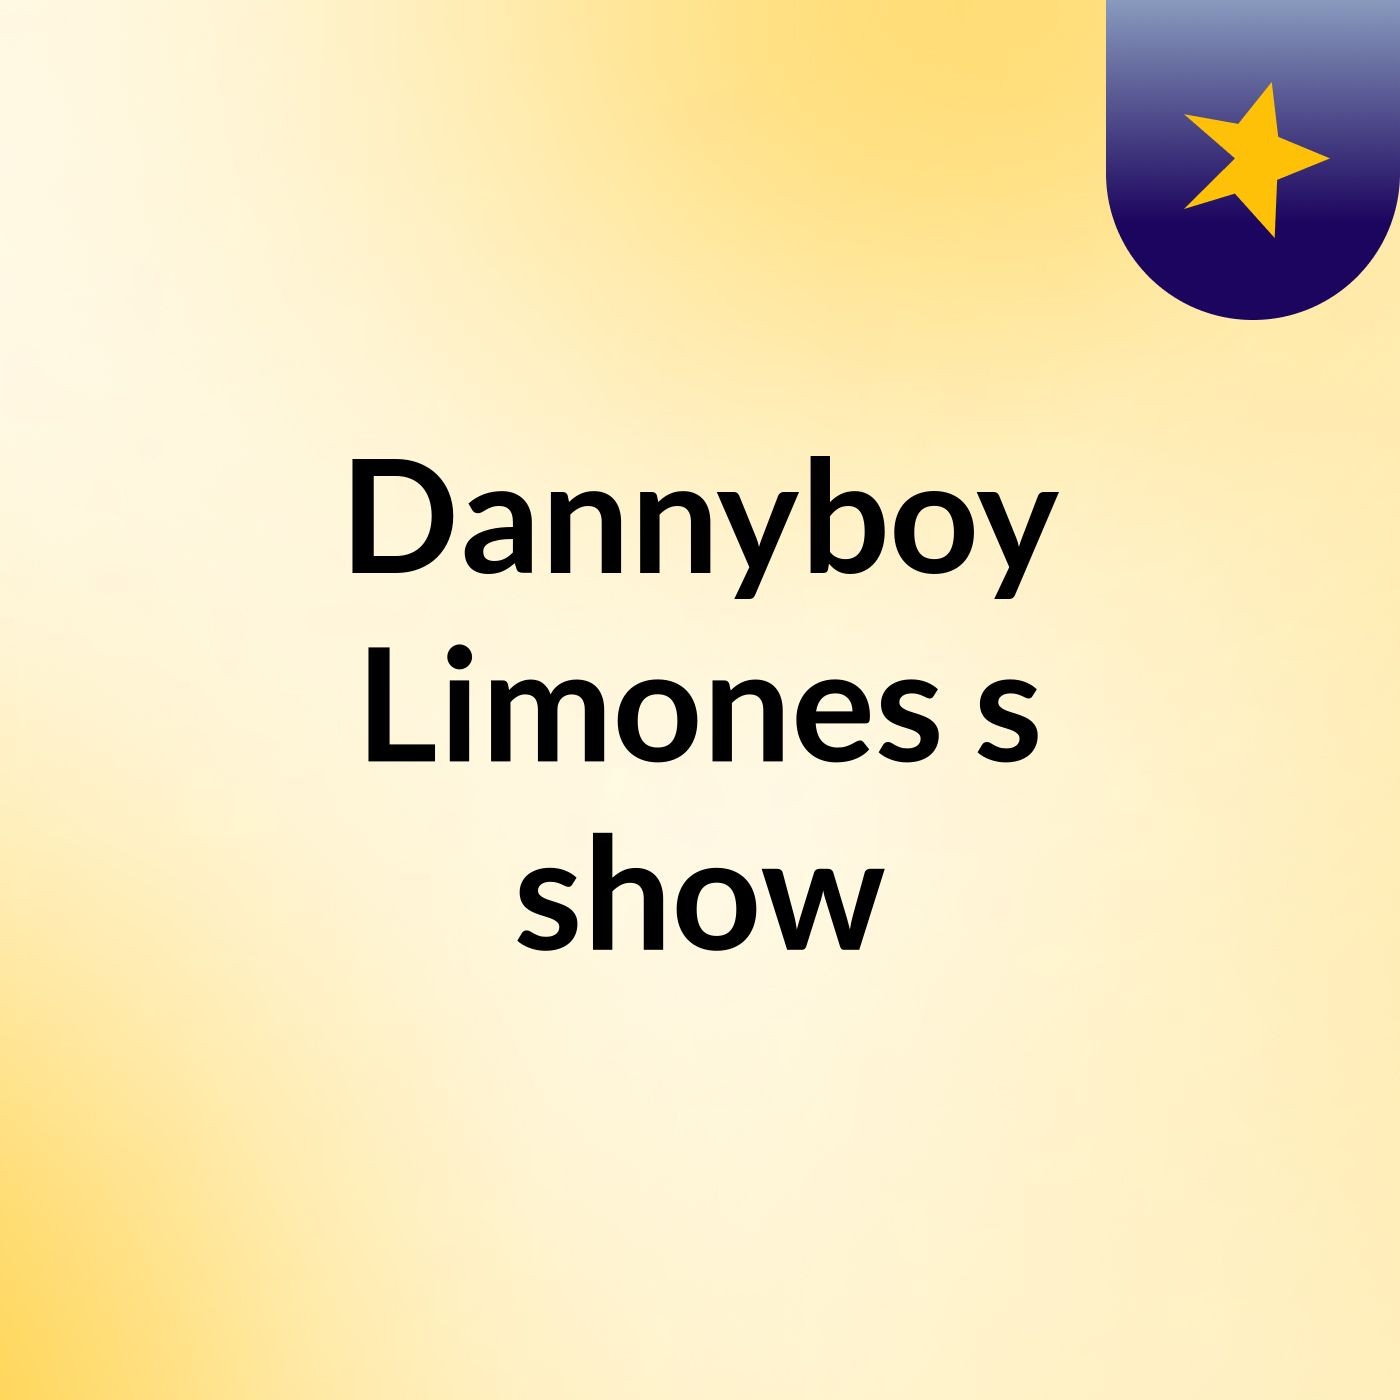 Are U With It- Dannyboy Limones's show